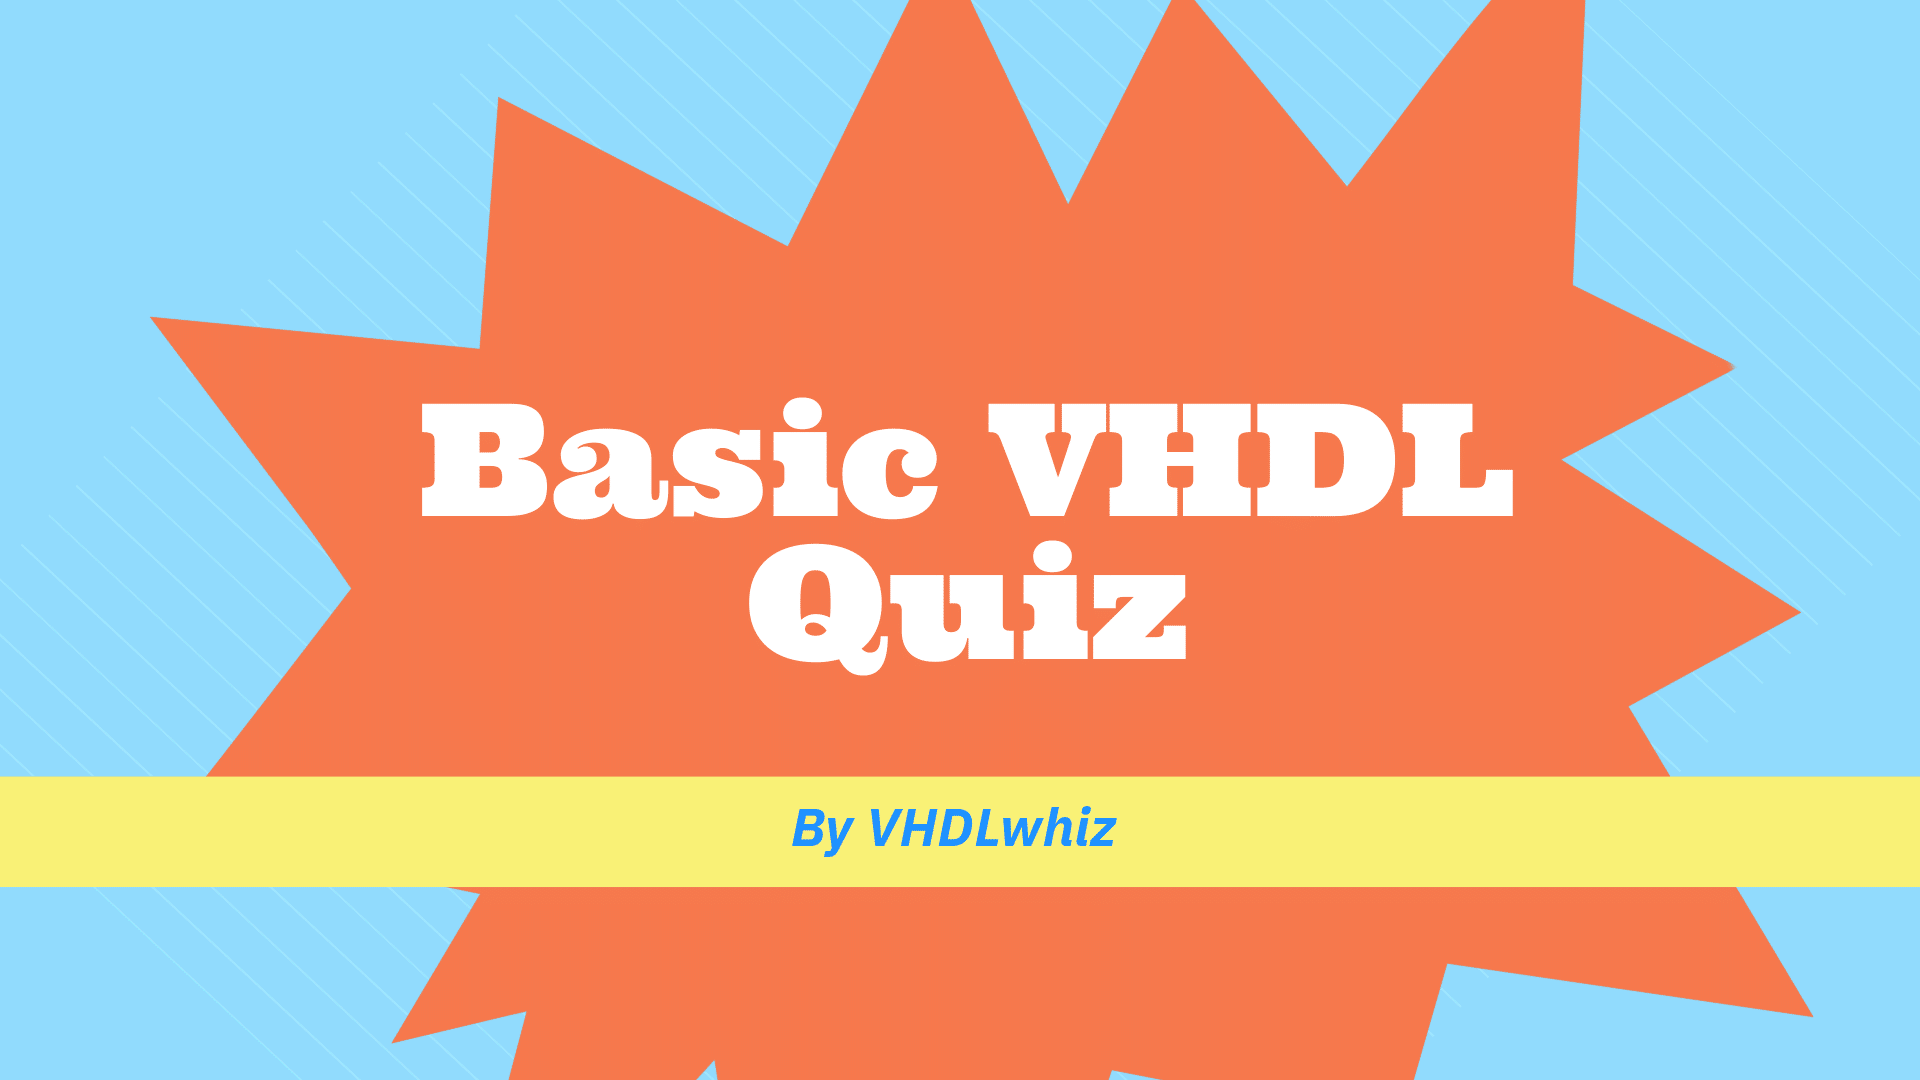 Basic VHDL quiz - All questions